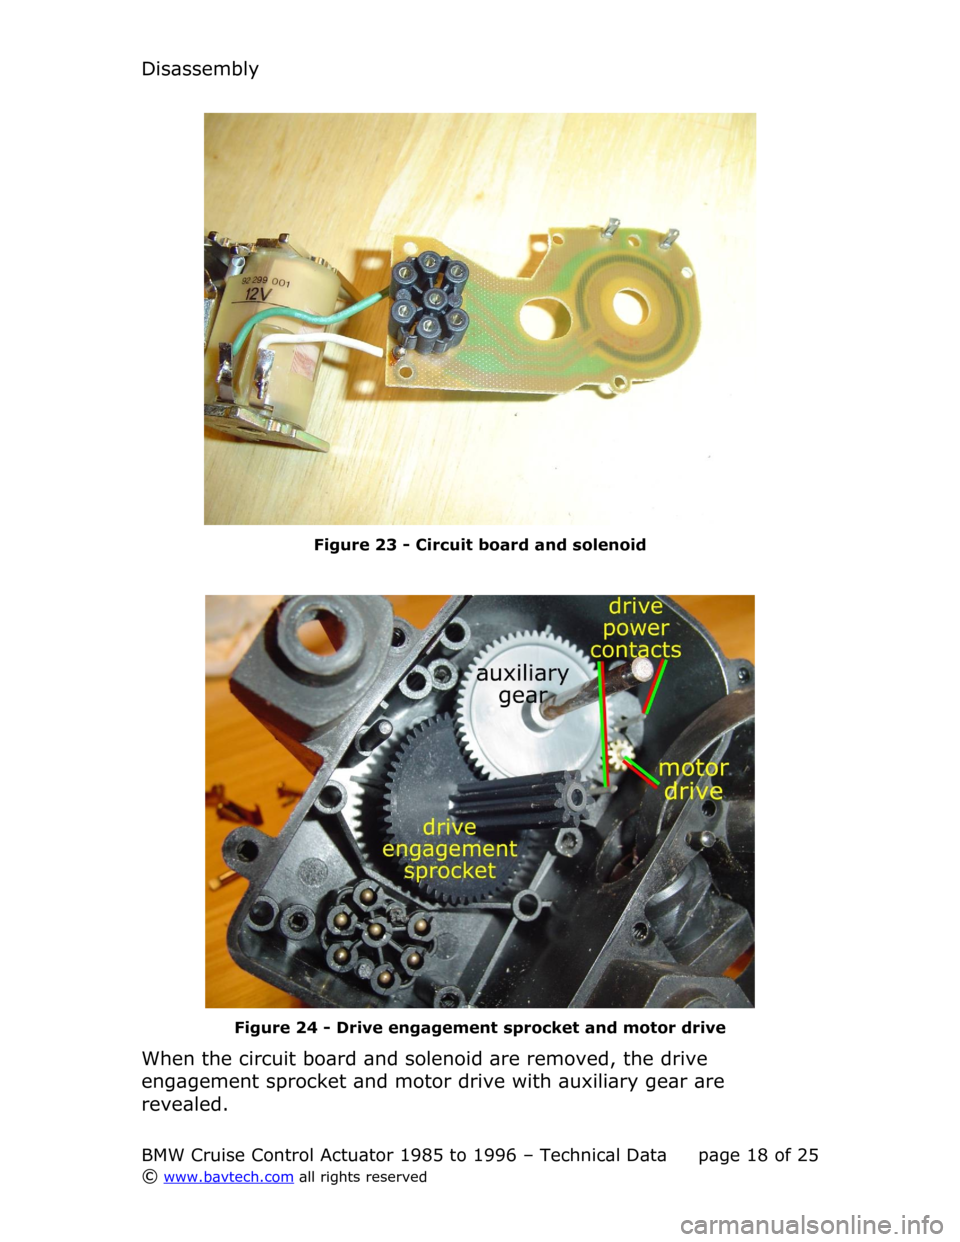 BMW 7 SERIES 1993 E32 Cruise Control Acutator Disassembly
Figure  23  - Circuit board and solenoid
Figure  24  - Drive engagement sprocket and motor drive
When the circuit board and solenoid are removed, the drive  
engagement sprocket and motor 